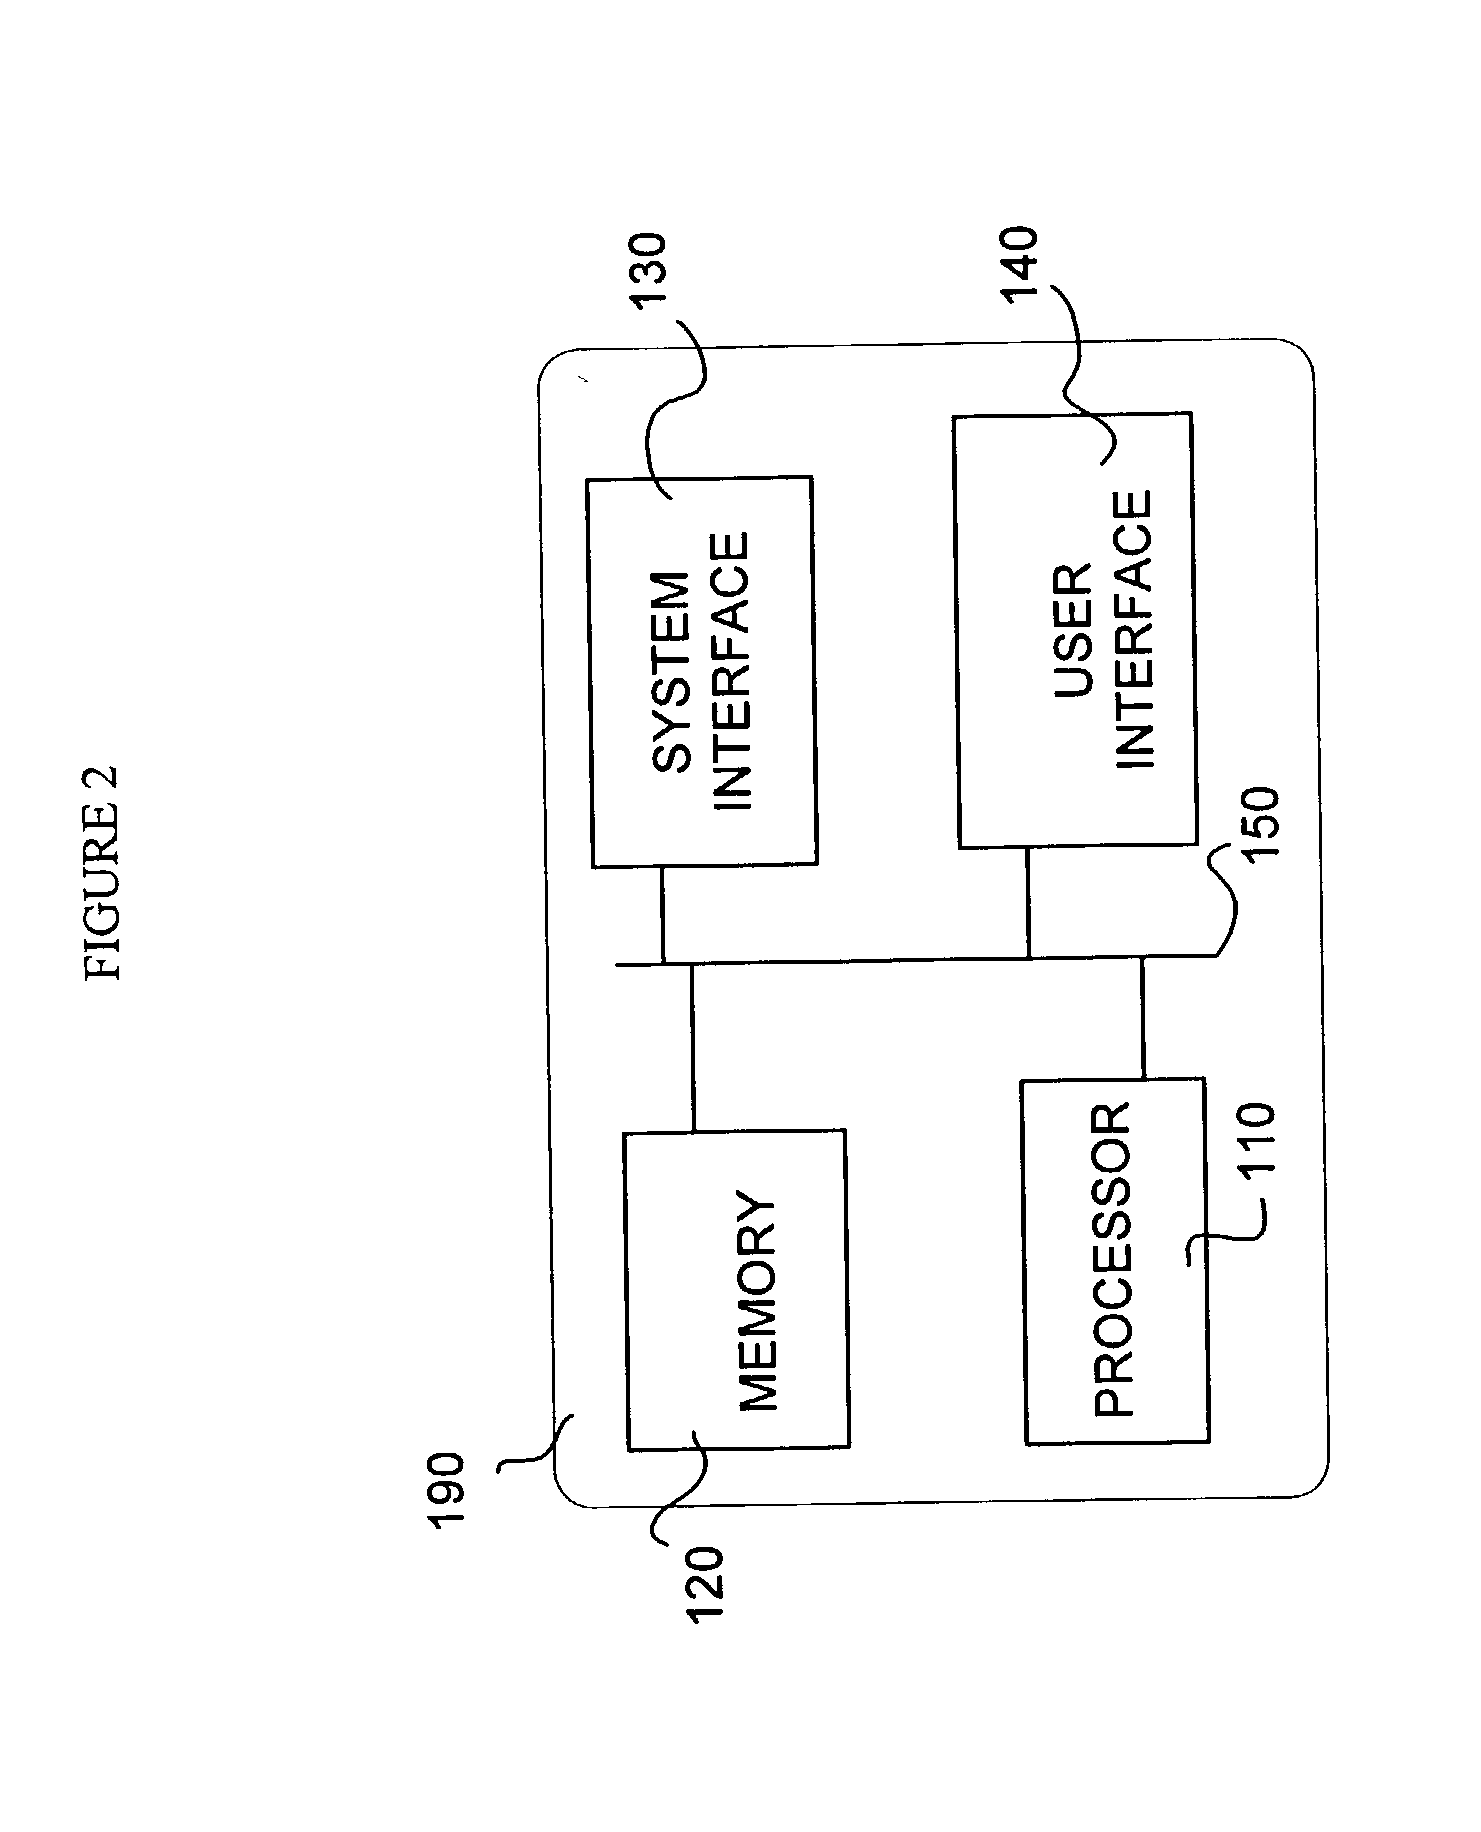 Method and system for valuation of financial instruments